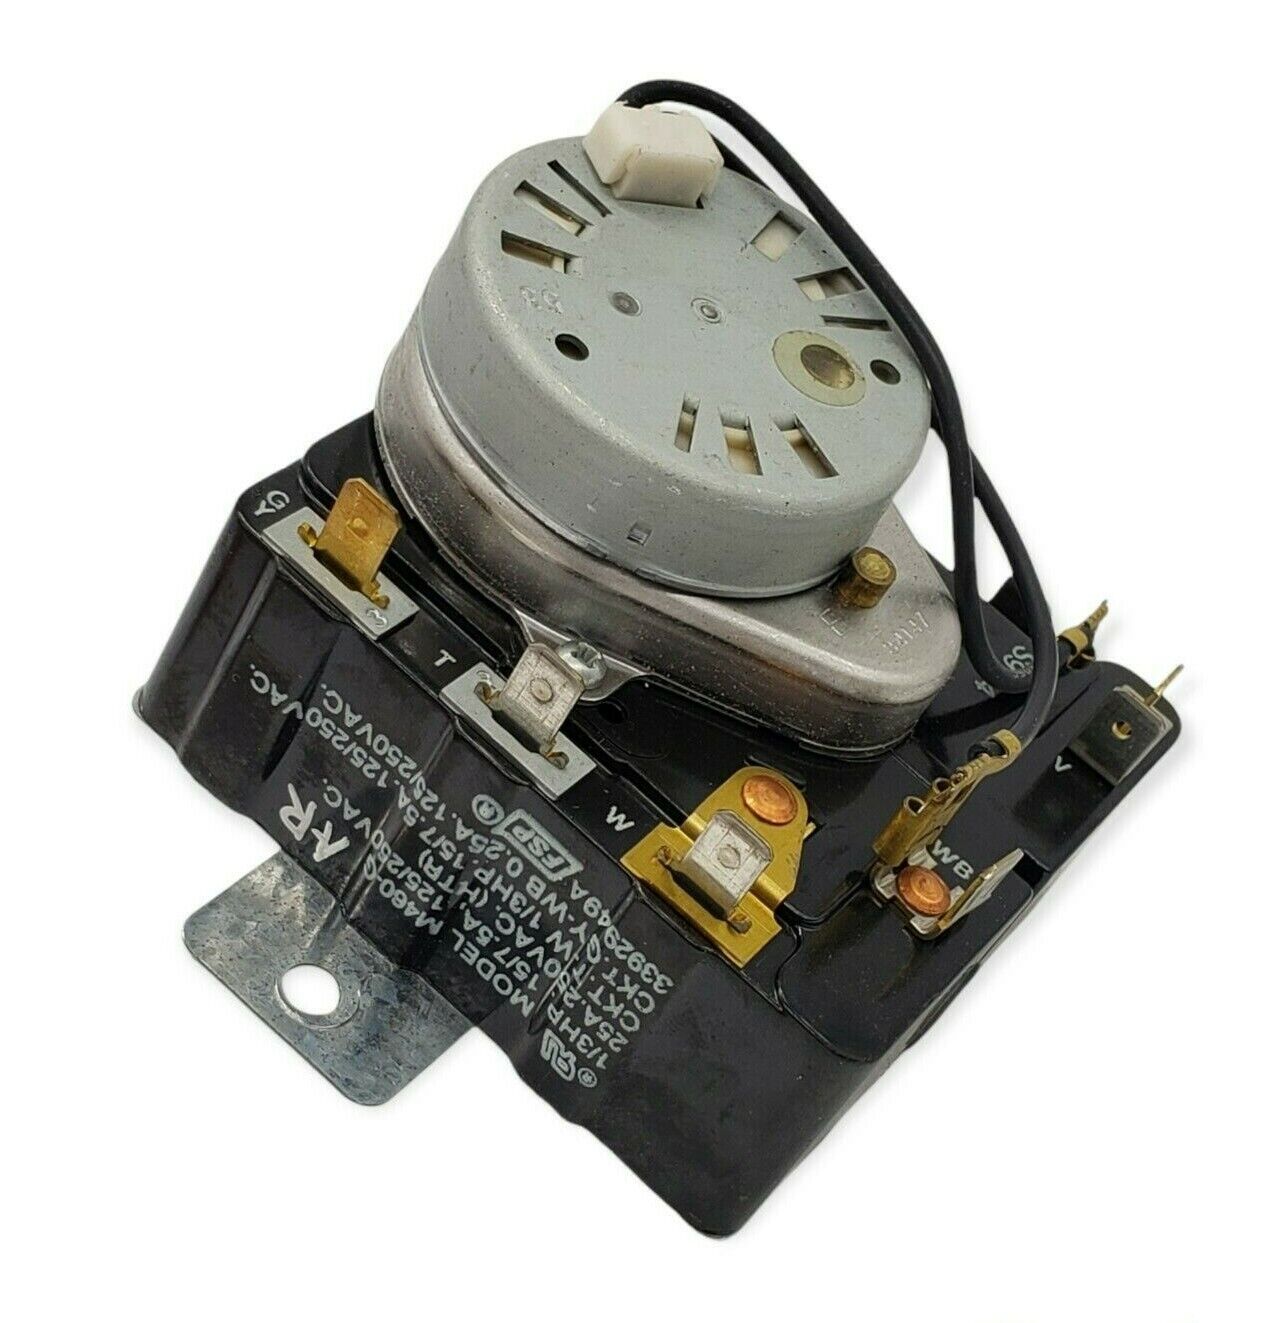 Genuine Replacement for Whirlpool Dryer Timer 3392949A 3392949